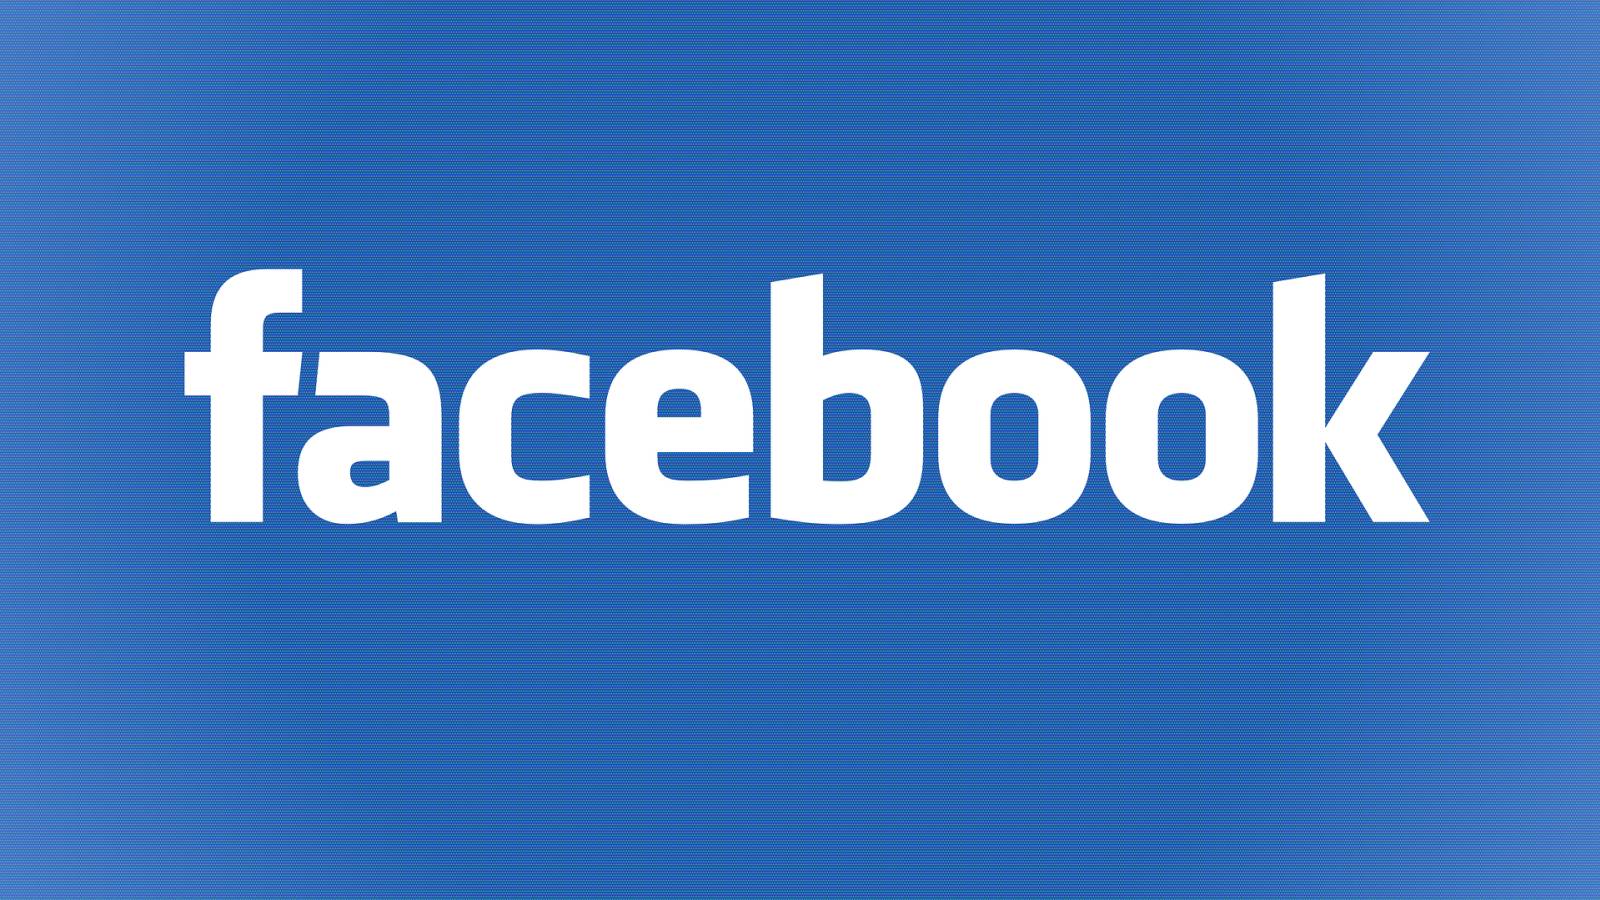 Facebook for iPhone and Android has been updated with what's new